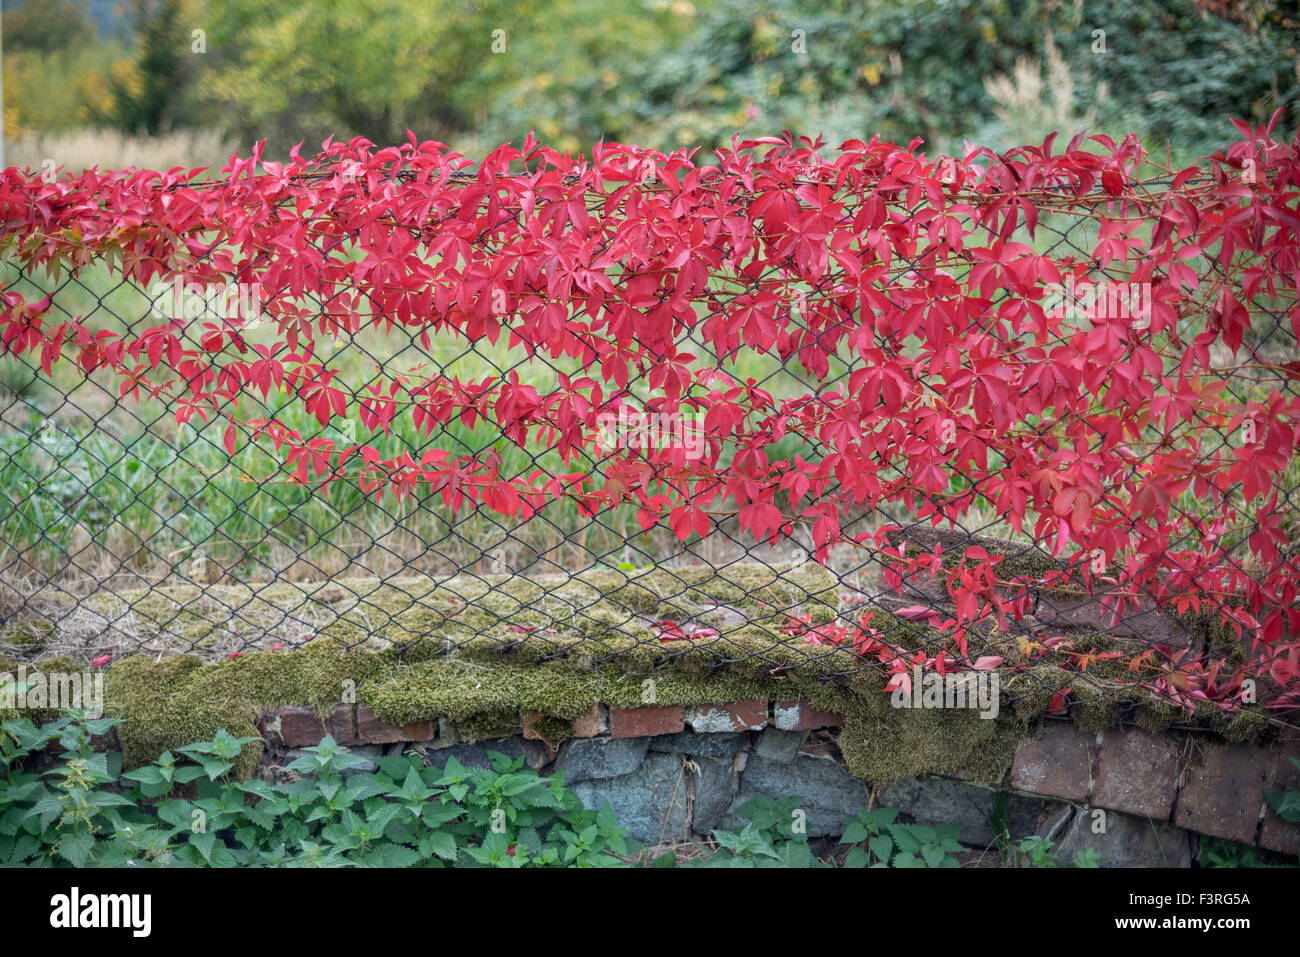 Old mesh fence overgrown with red autumn creeper Stock Photo